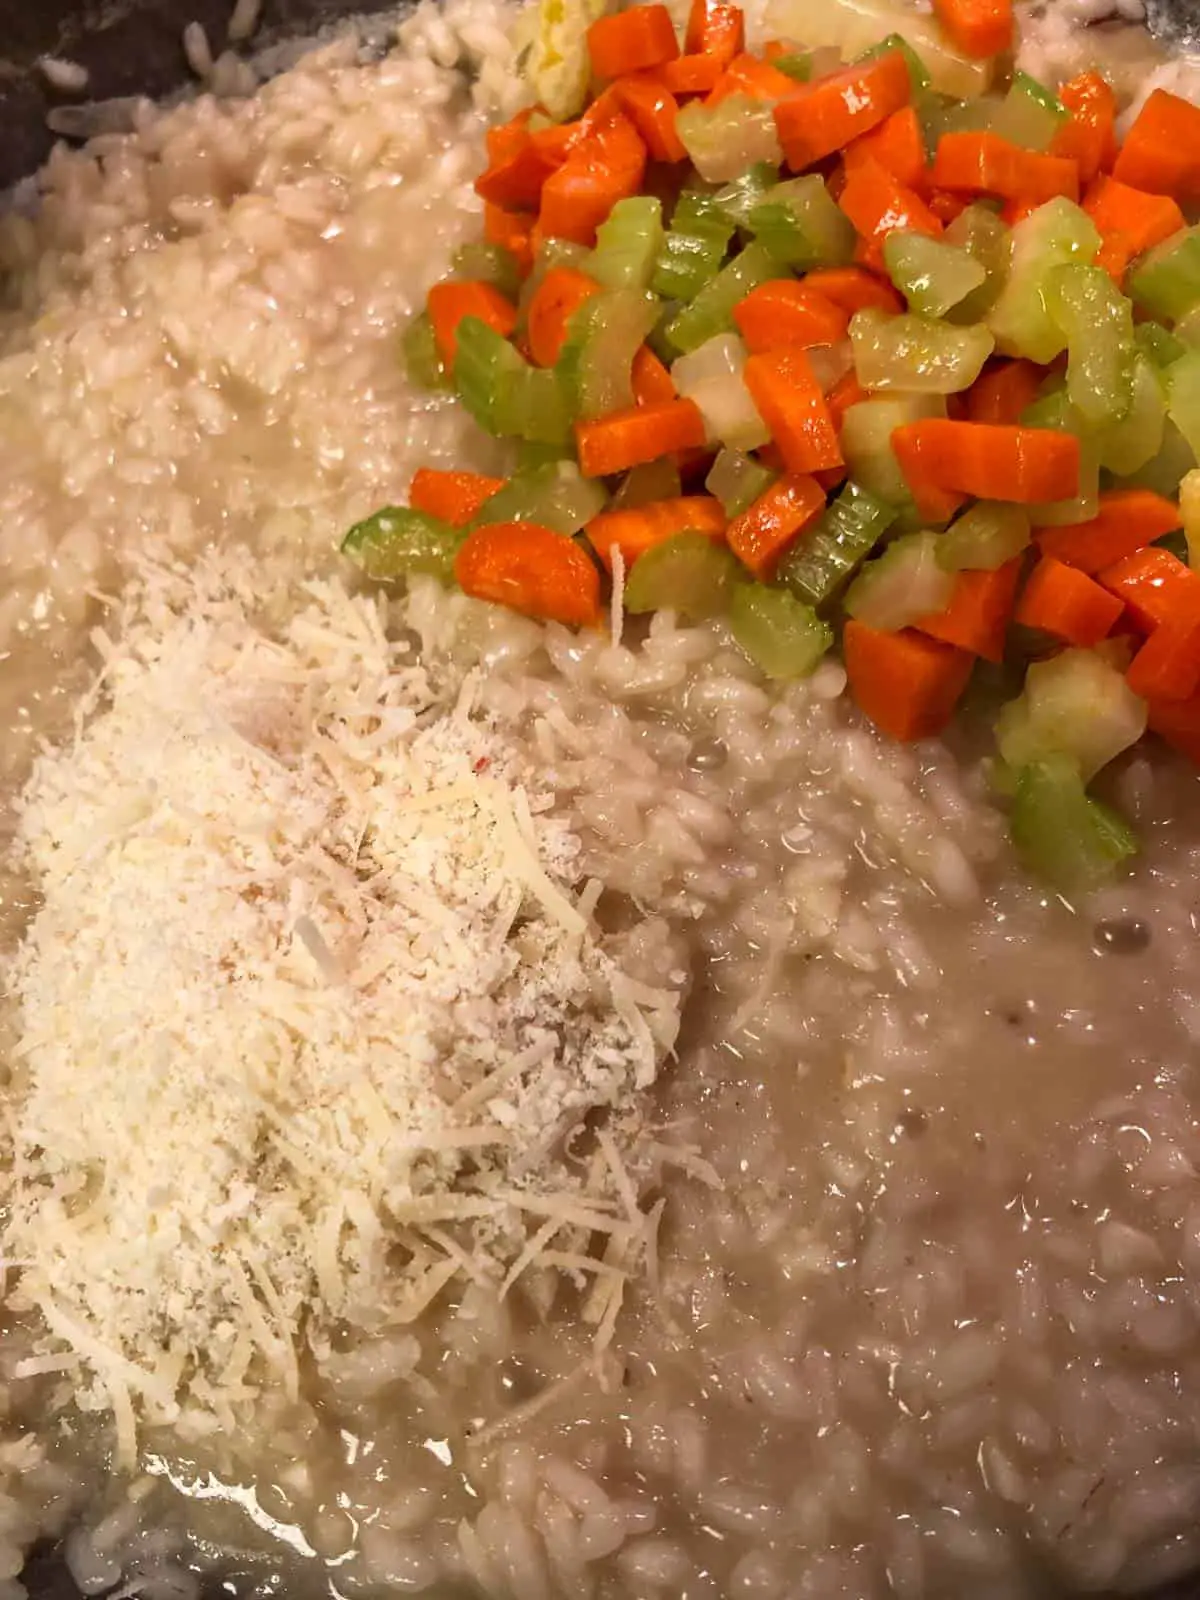 Creamy risotto rice with grated Parmigiano Reggiano and cooked diced carrots and celery.